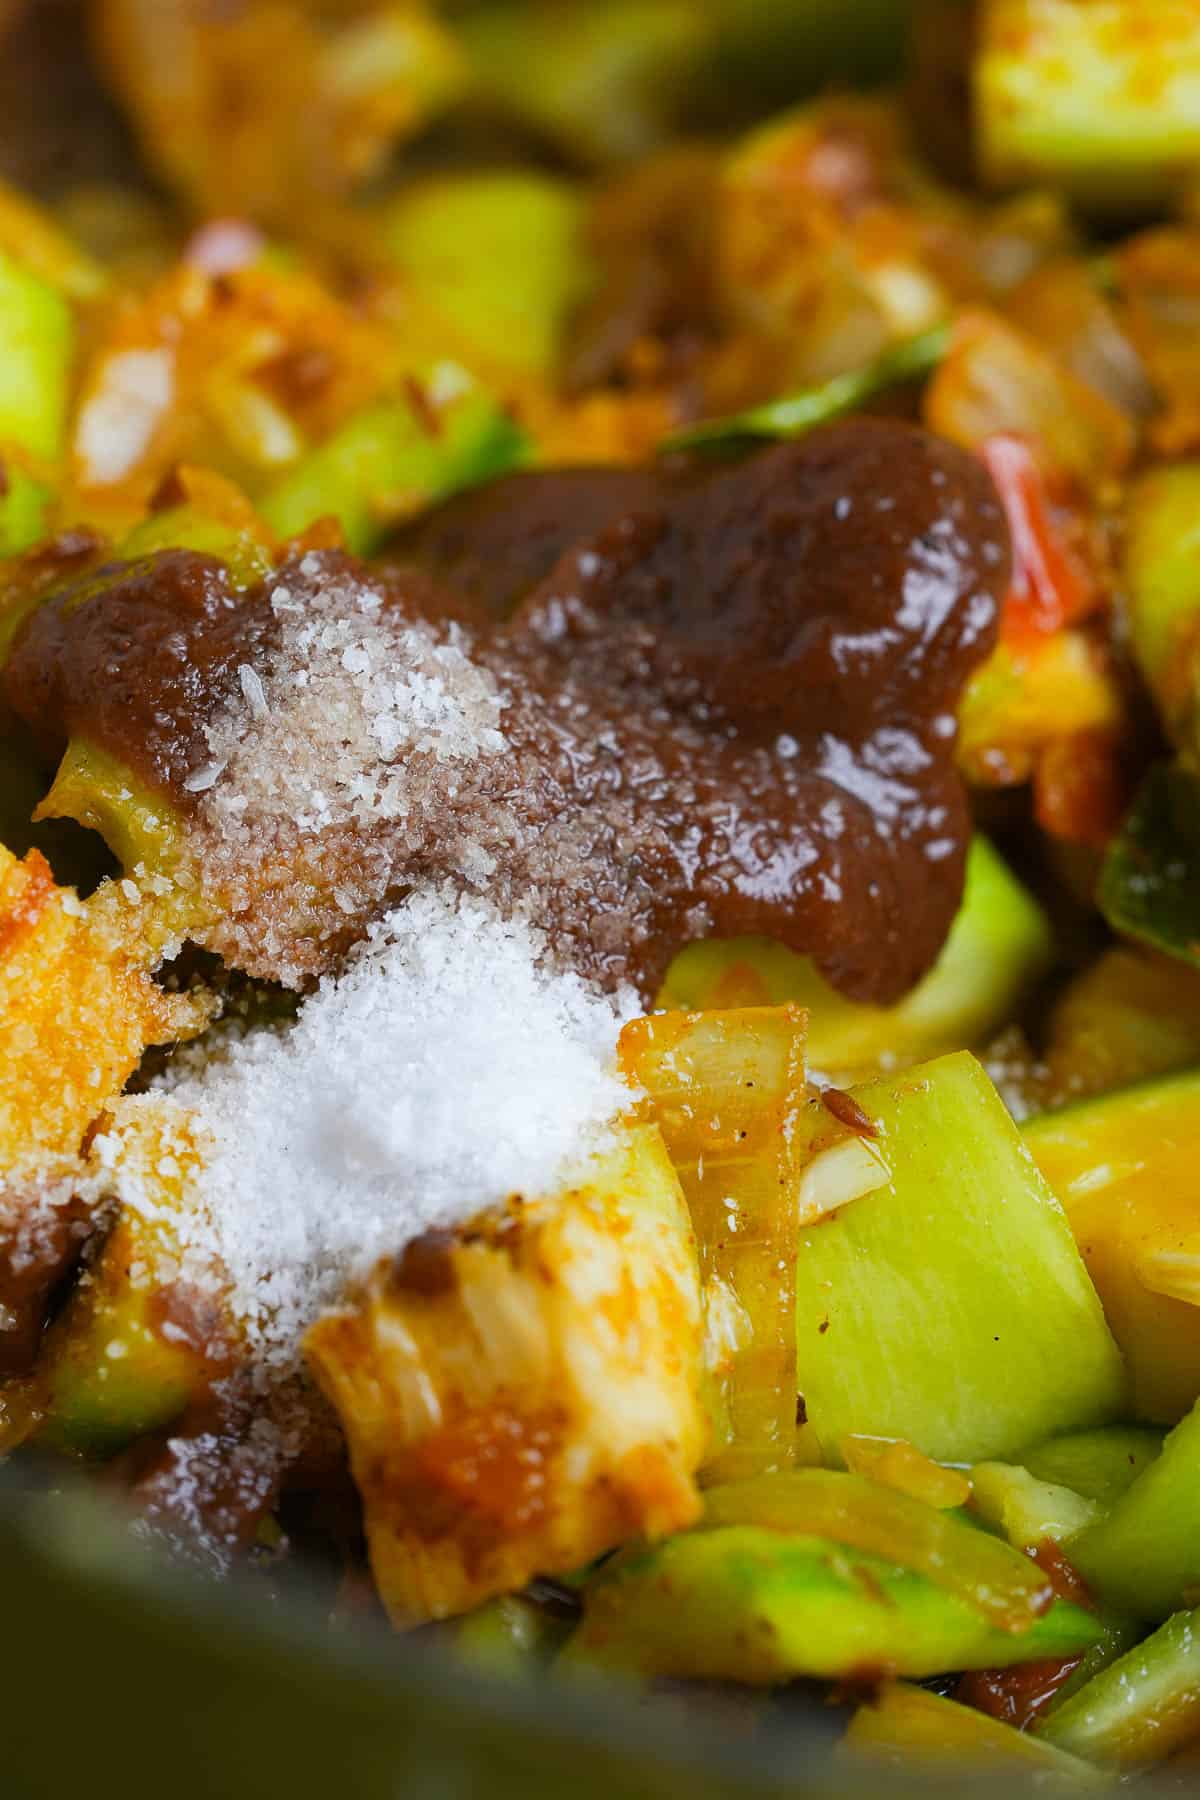 salt and tamarind concentrate are added to the cooking vegetables in a pan.